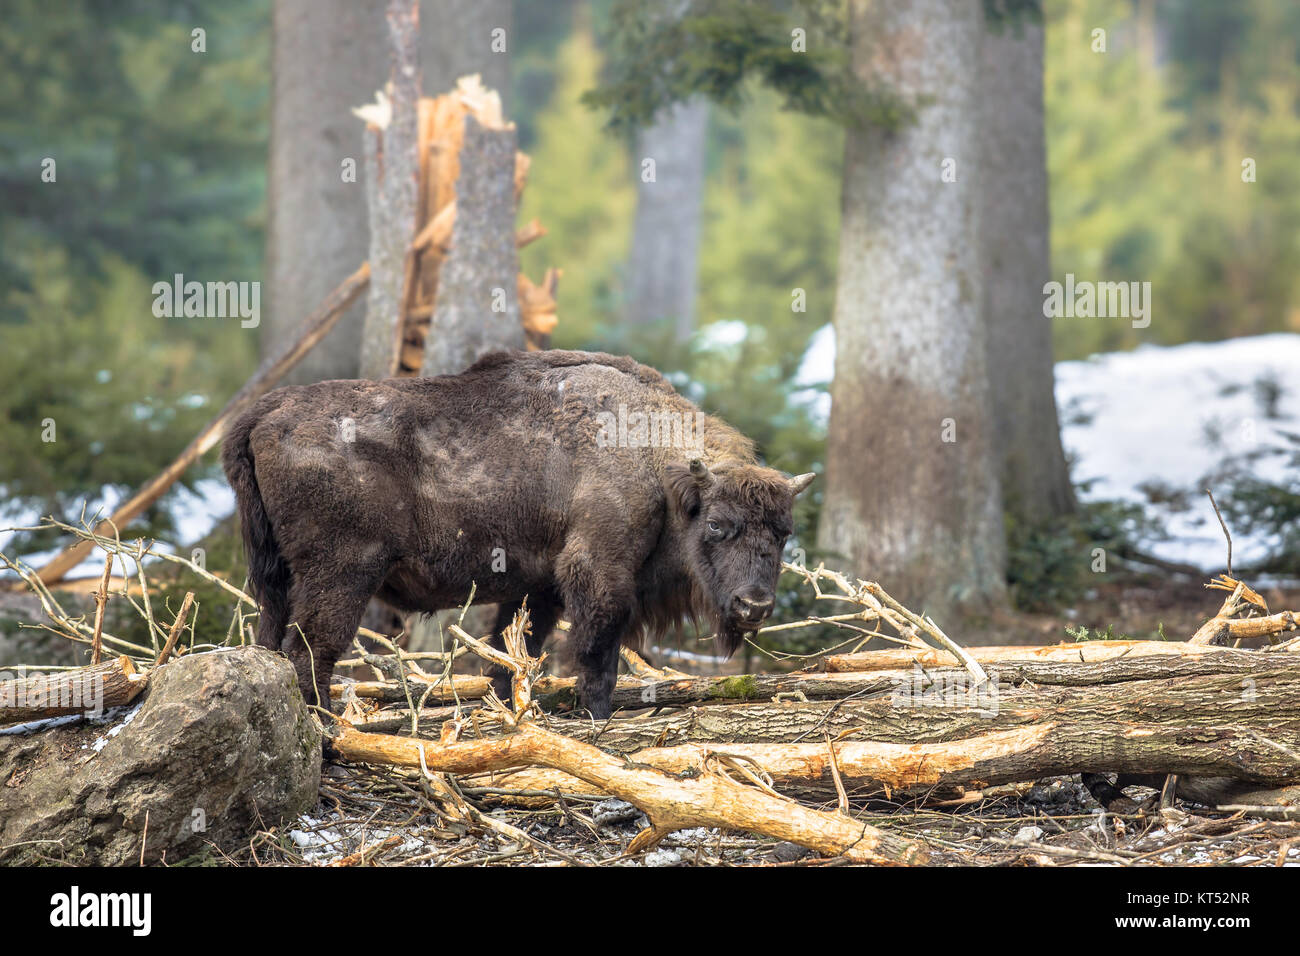 The European bison (Bison bonasus), also known as wisent or the European wood bison roaming in mountain forest habitat Stock Photo